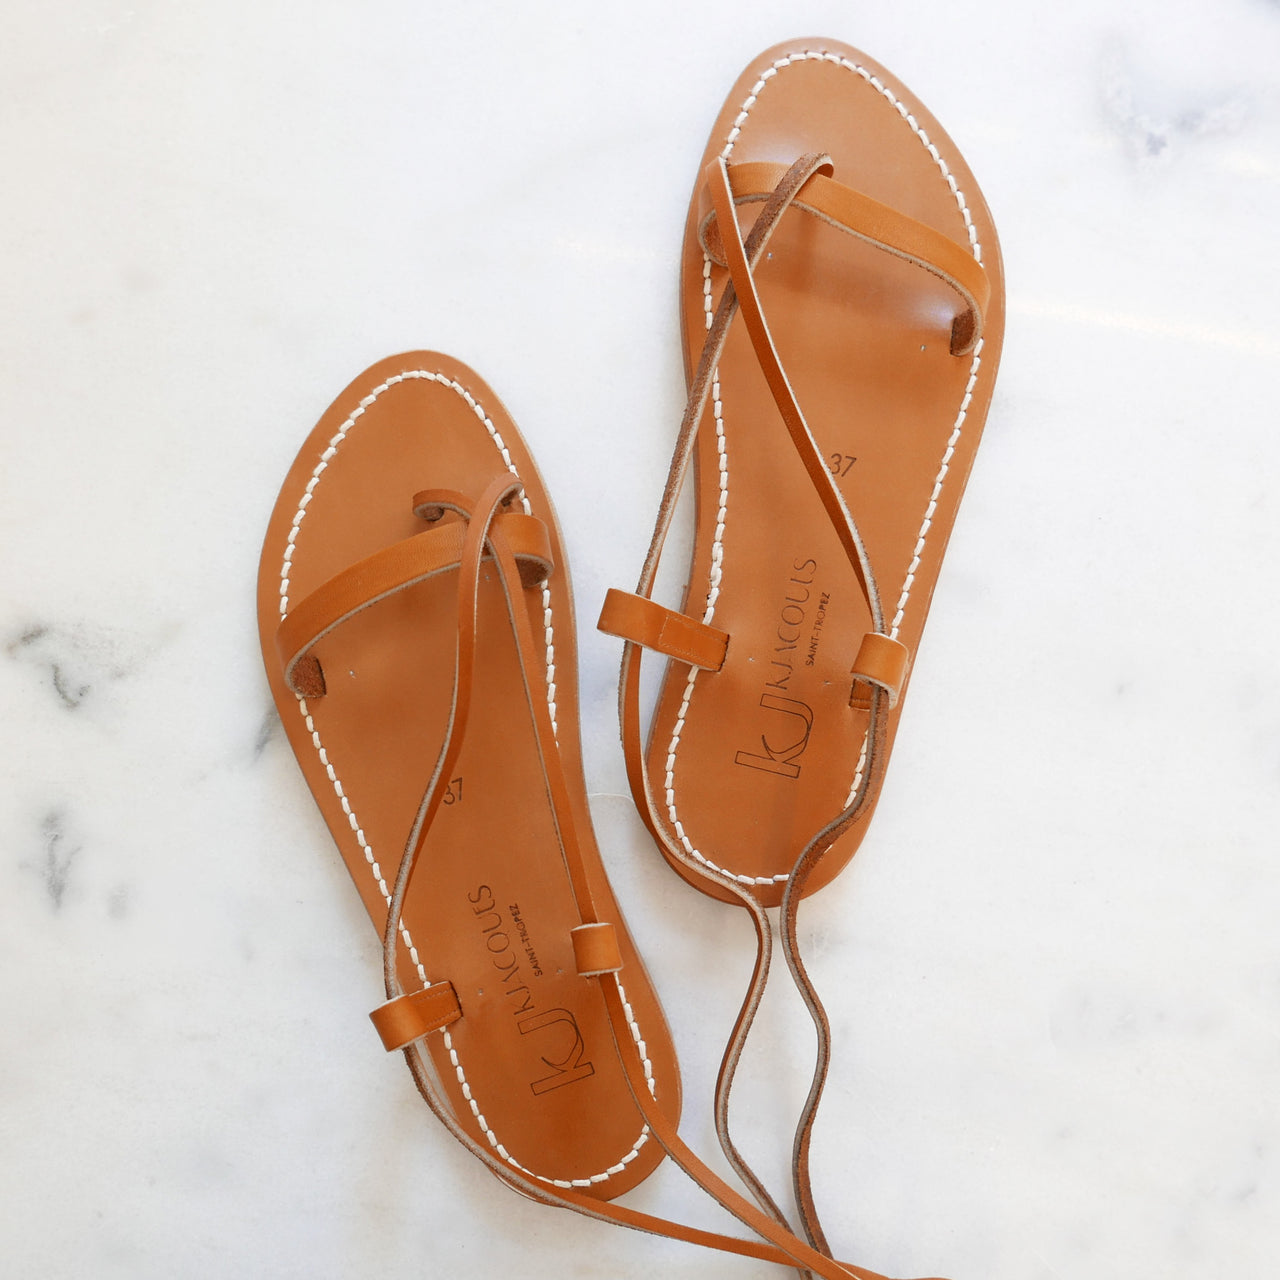 Tiresias Leather Sandals in Natural Tan